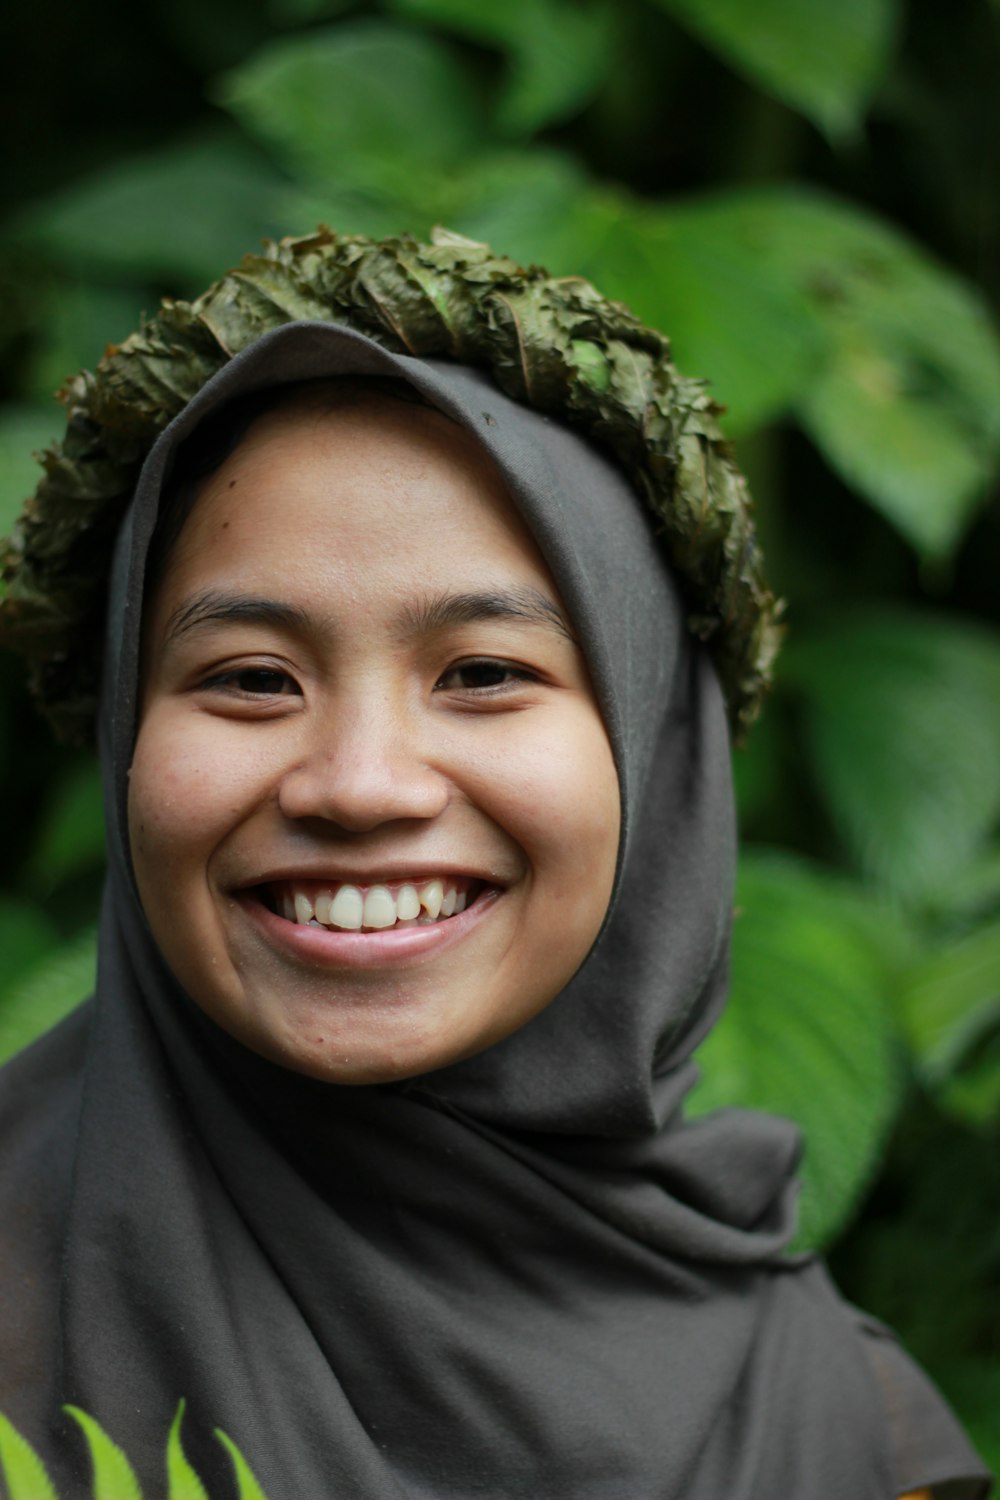 a woman wearing a headscarf smiles for the camera